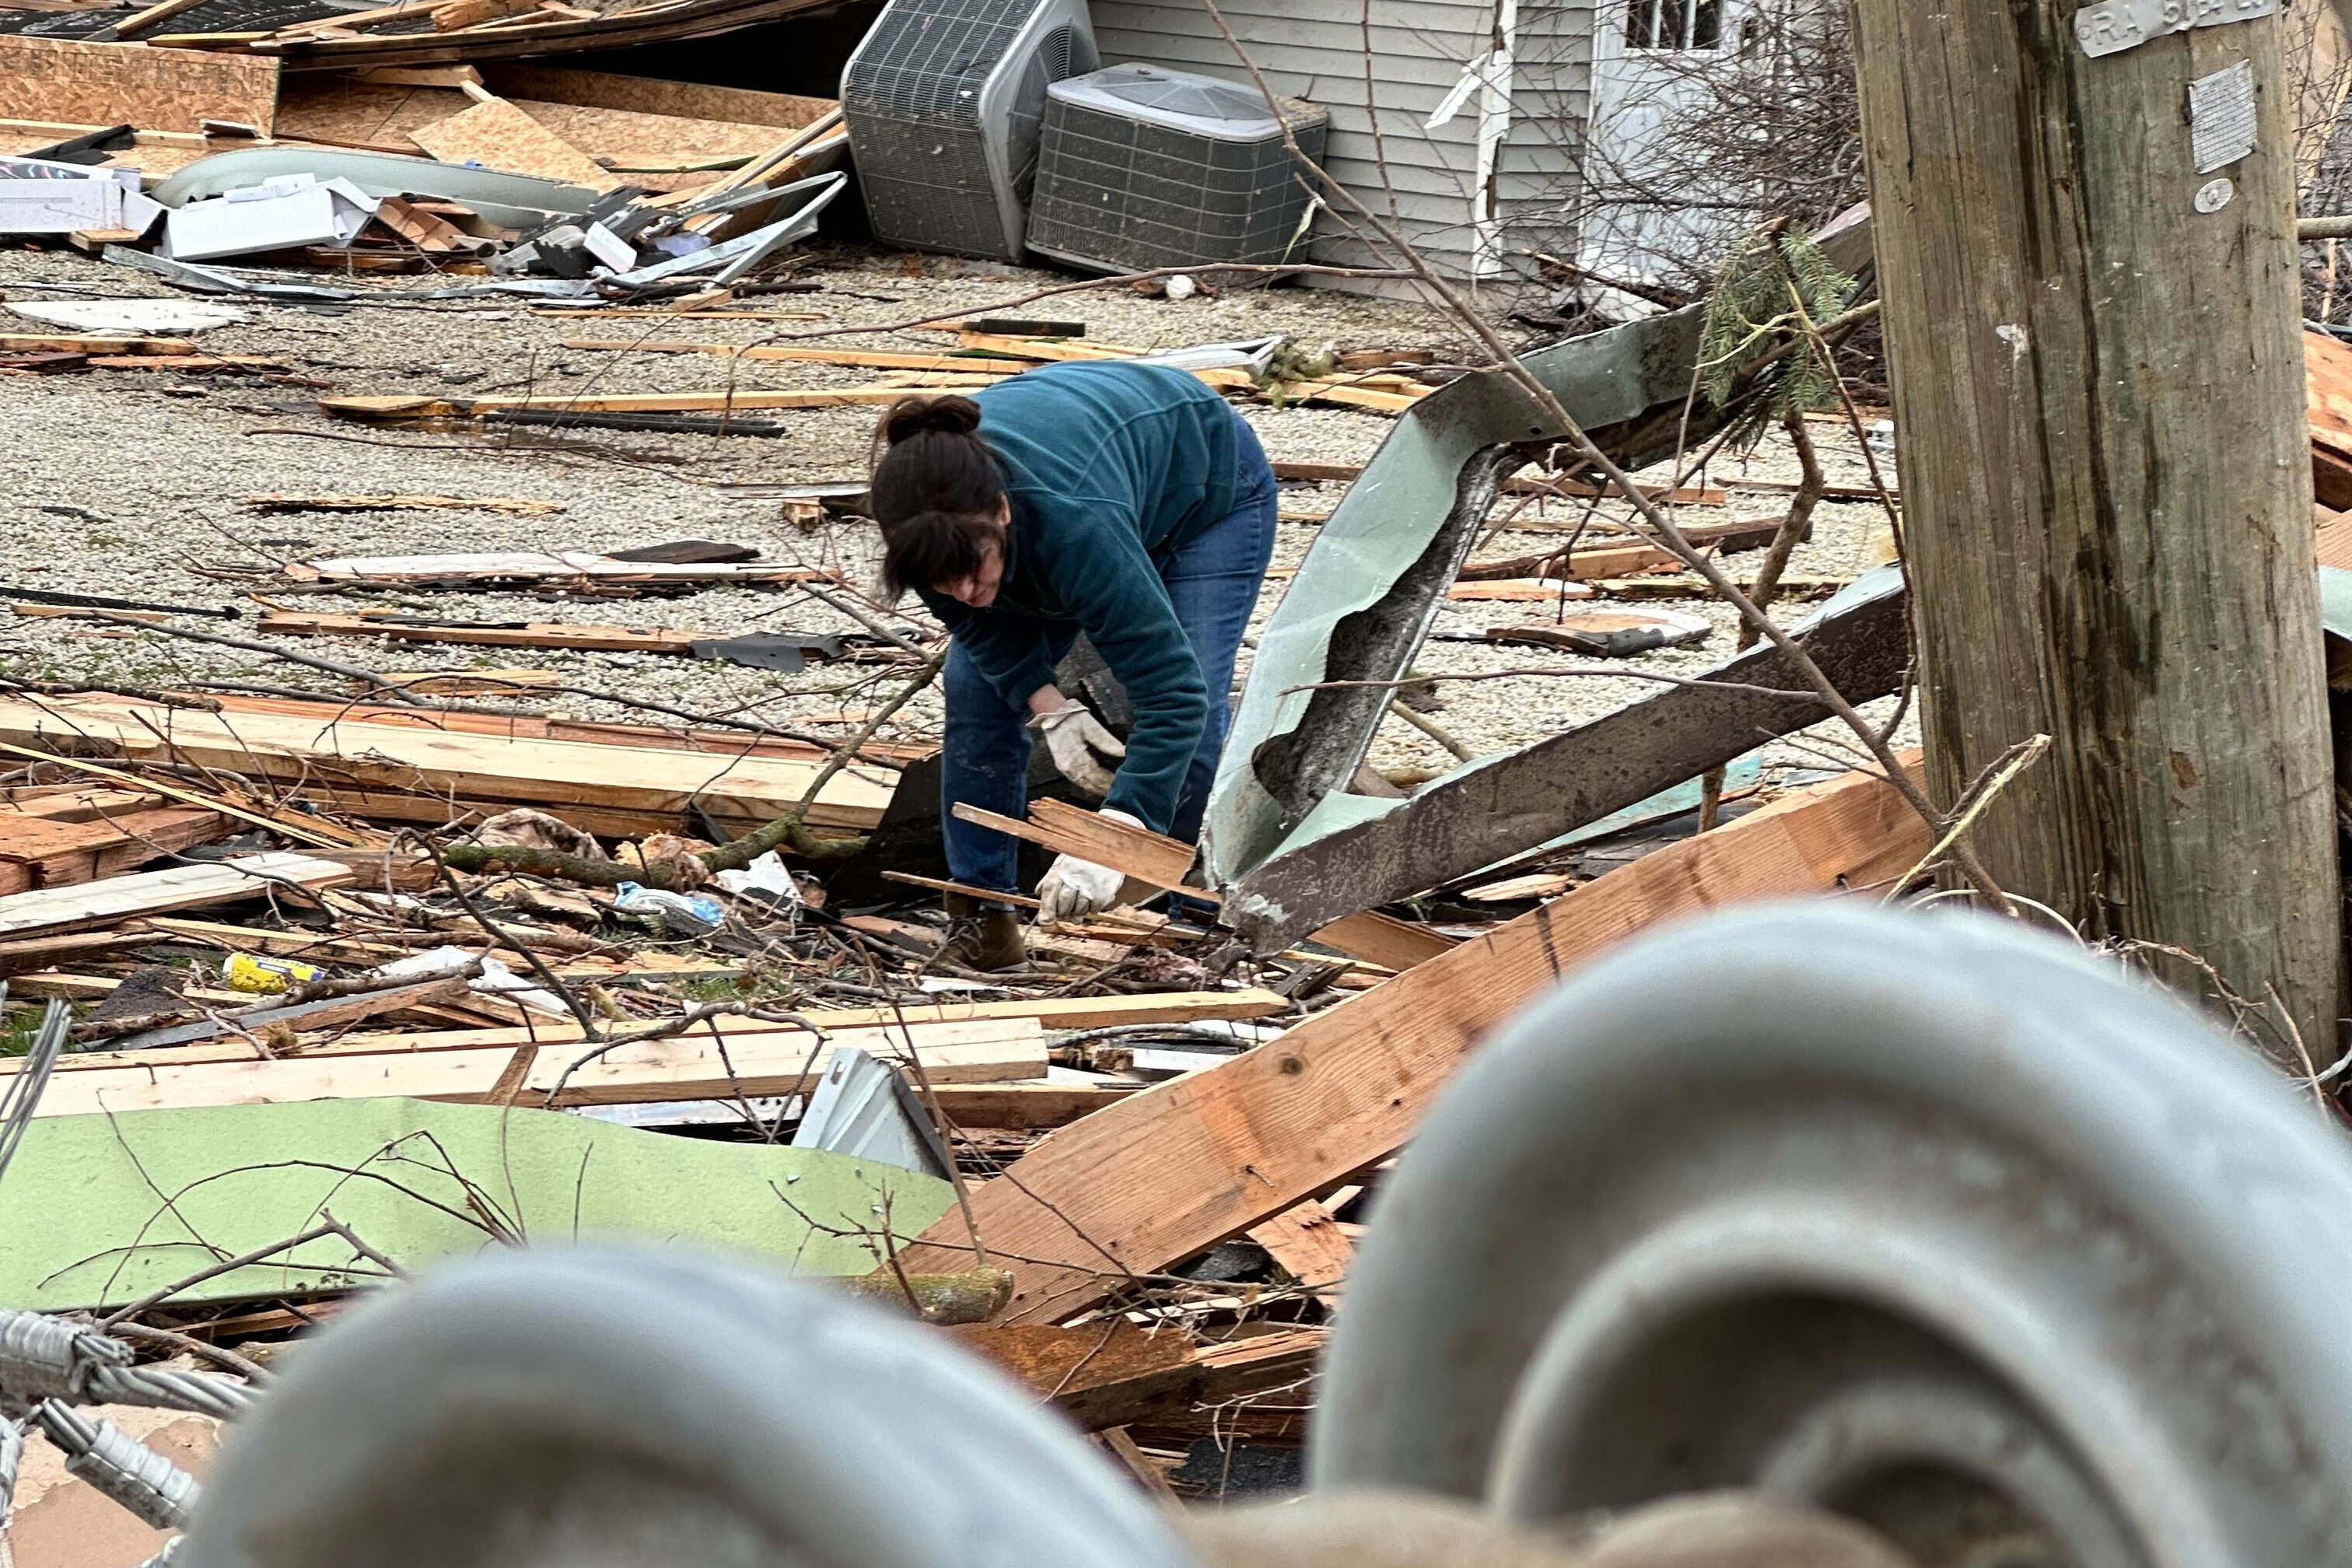 a woman in a green sweater is bent over, picking through debris surrounding her. Beams from the nearby homes are scattered across gravel and grass.